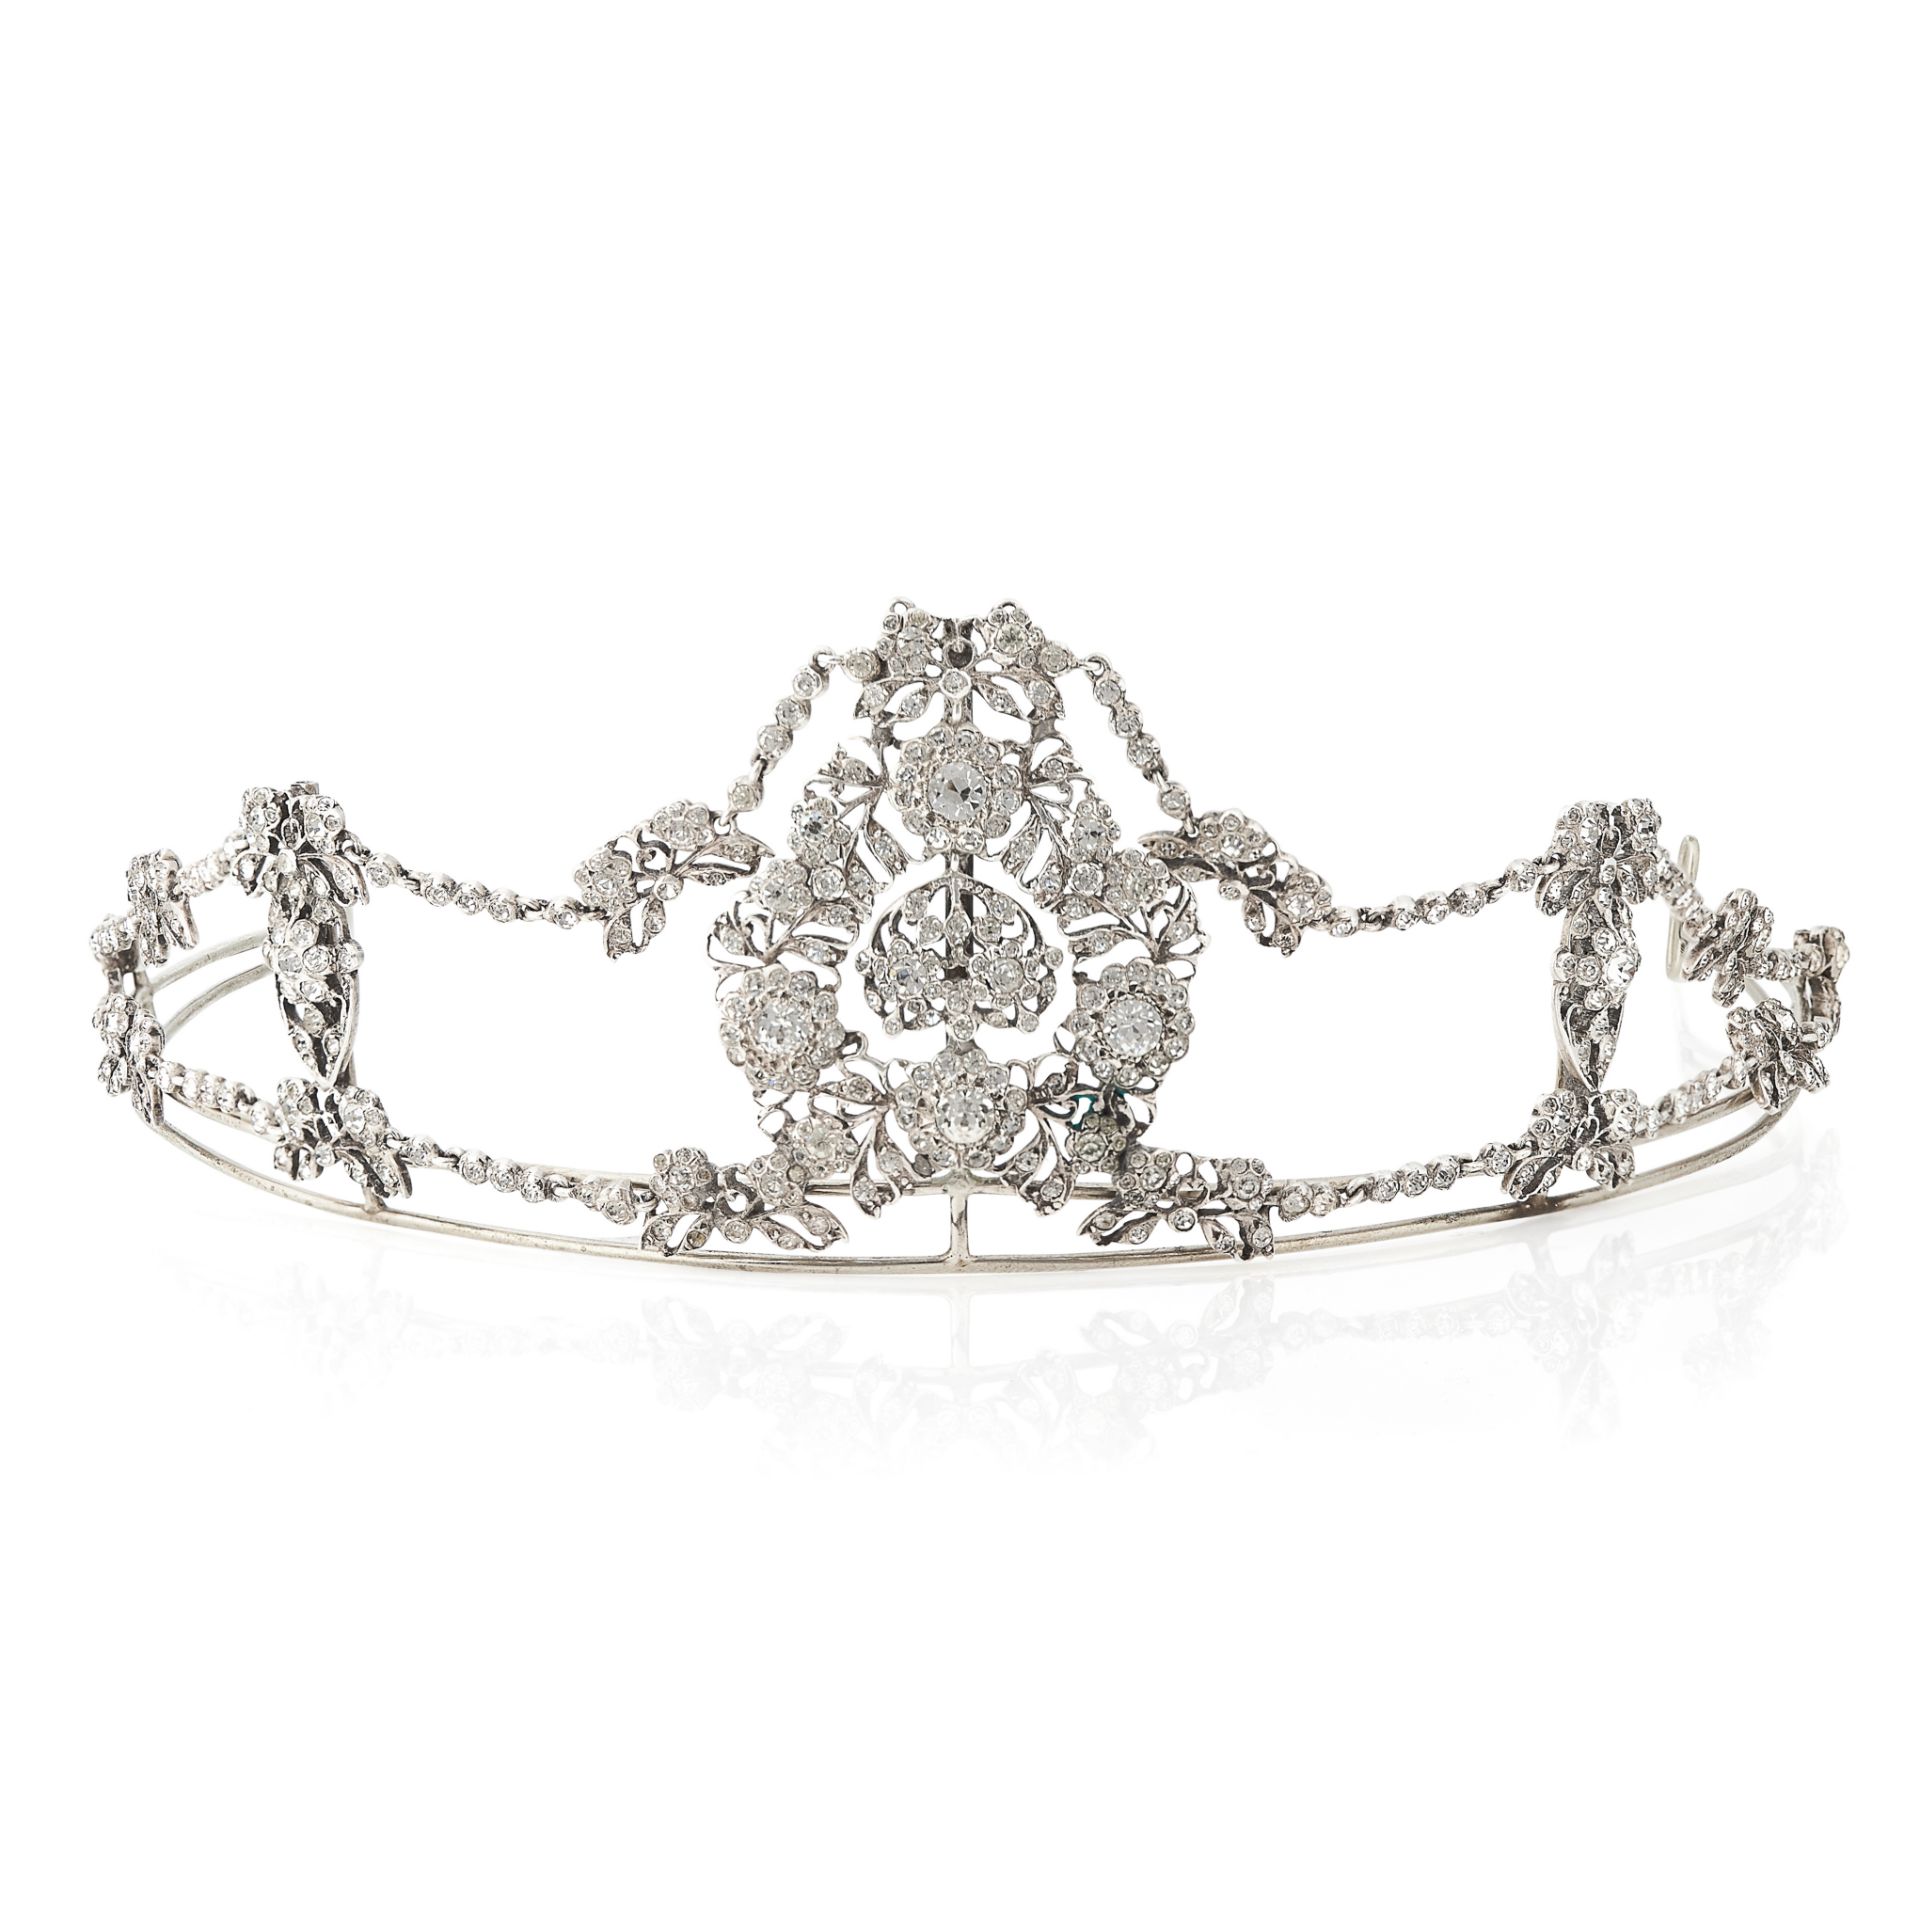 AN ANTIQUE PASTE DIAMOND TIARA the frame applied with five principal sections of foliate and